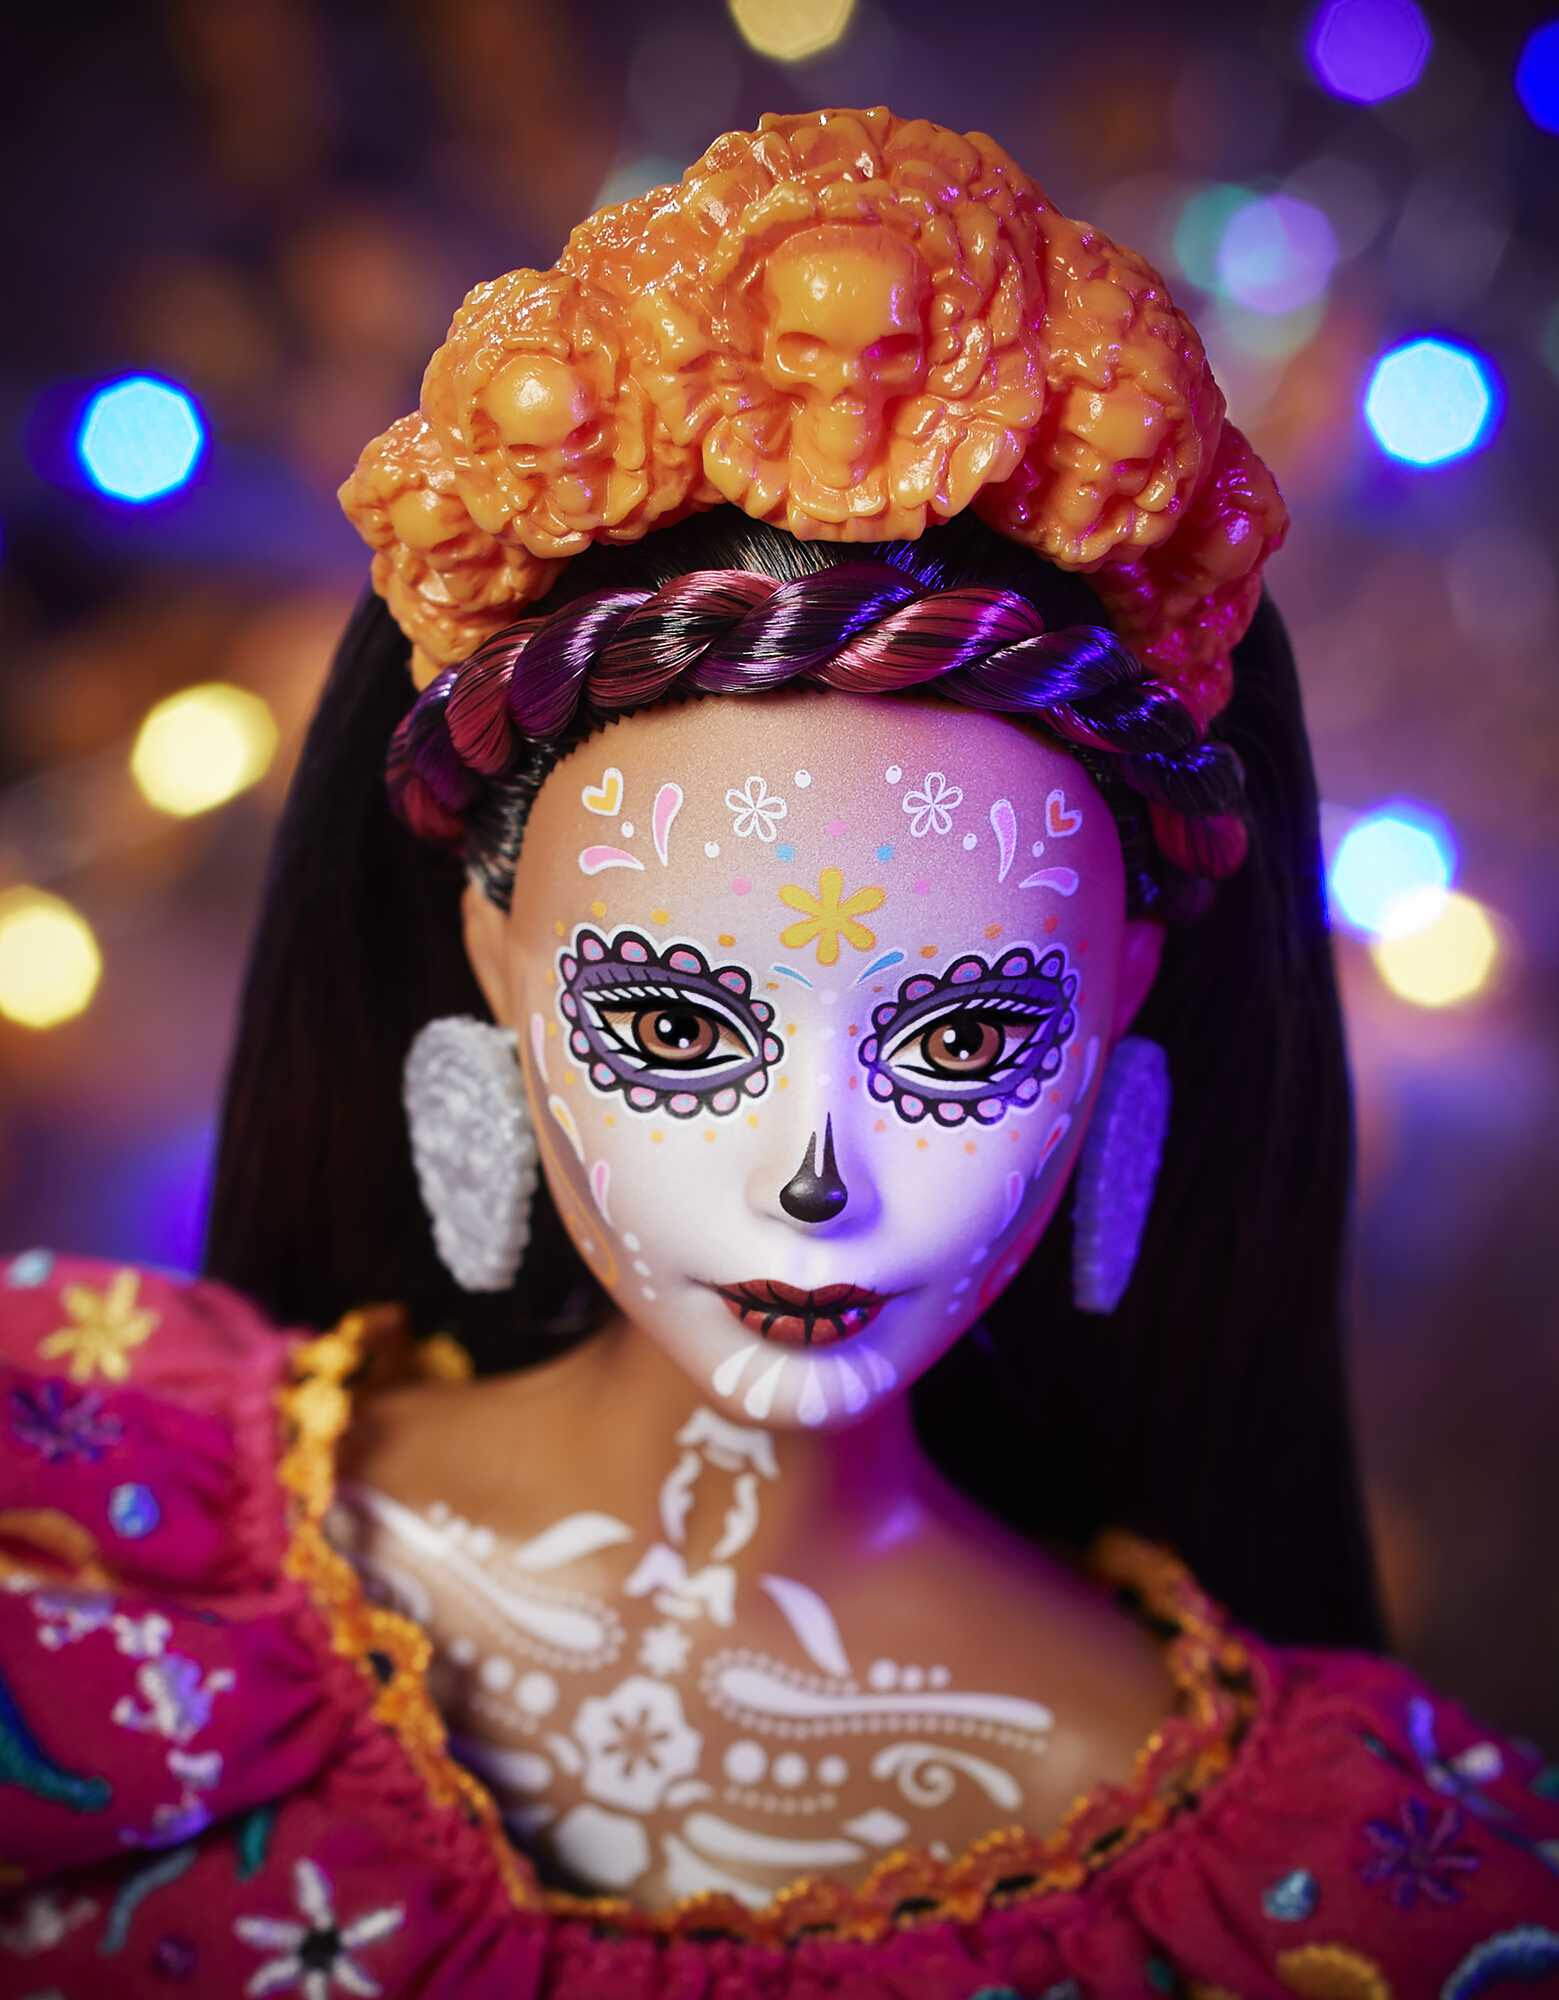 Barbie Signature 2022 Dia de Muertos Collectible Doll in Embroidered Dress & Flower Crown - image 5 of 7